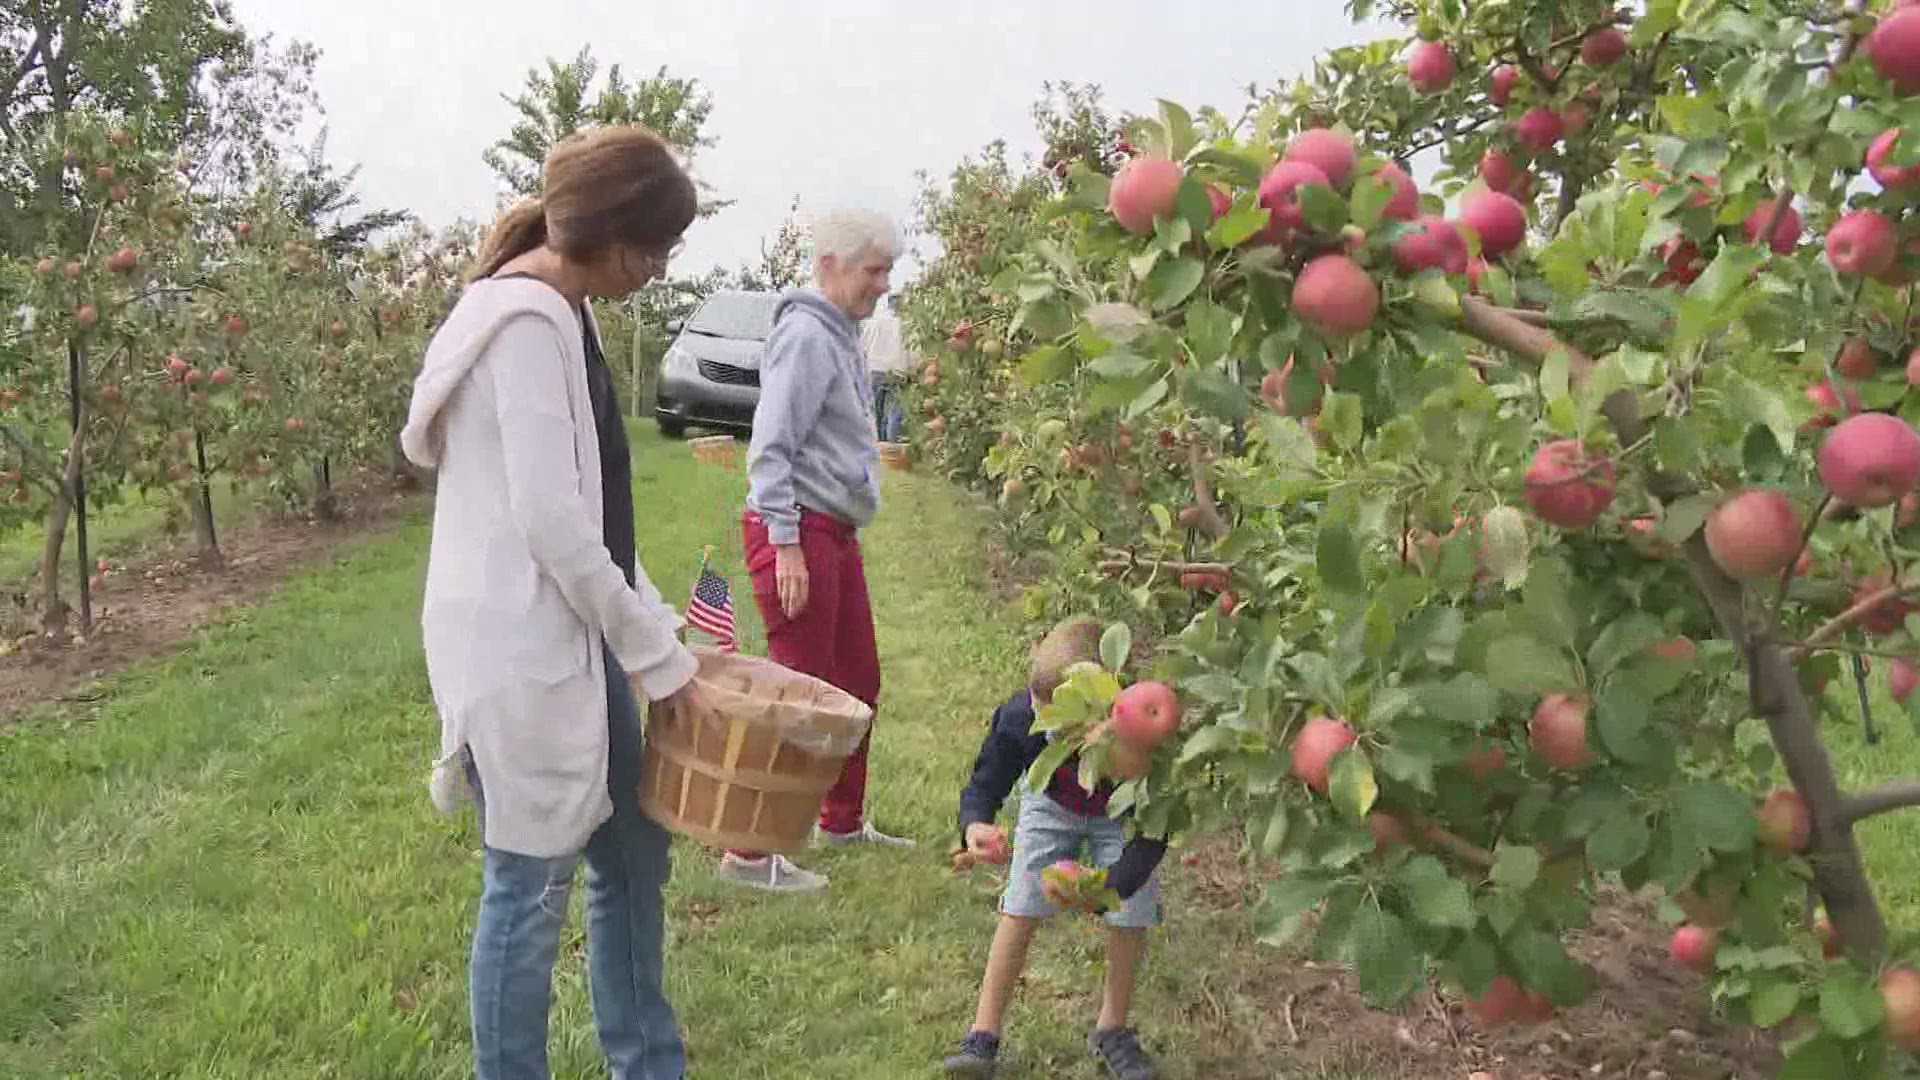 U-pick apple season is here. Here's how you can pick apples and practice safe health precautions amid a pandemic.